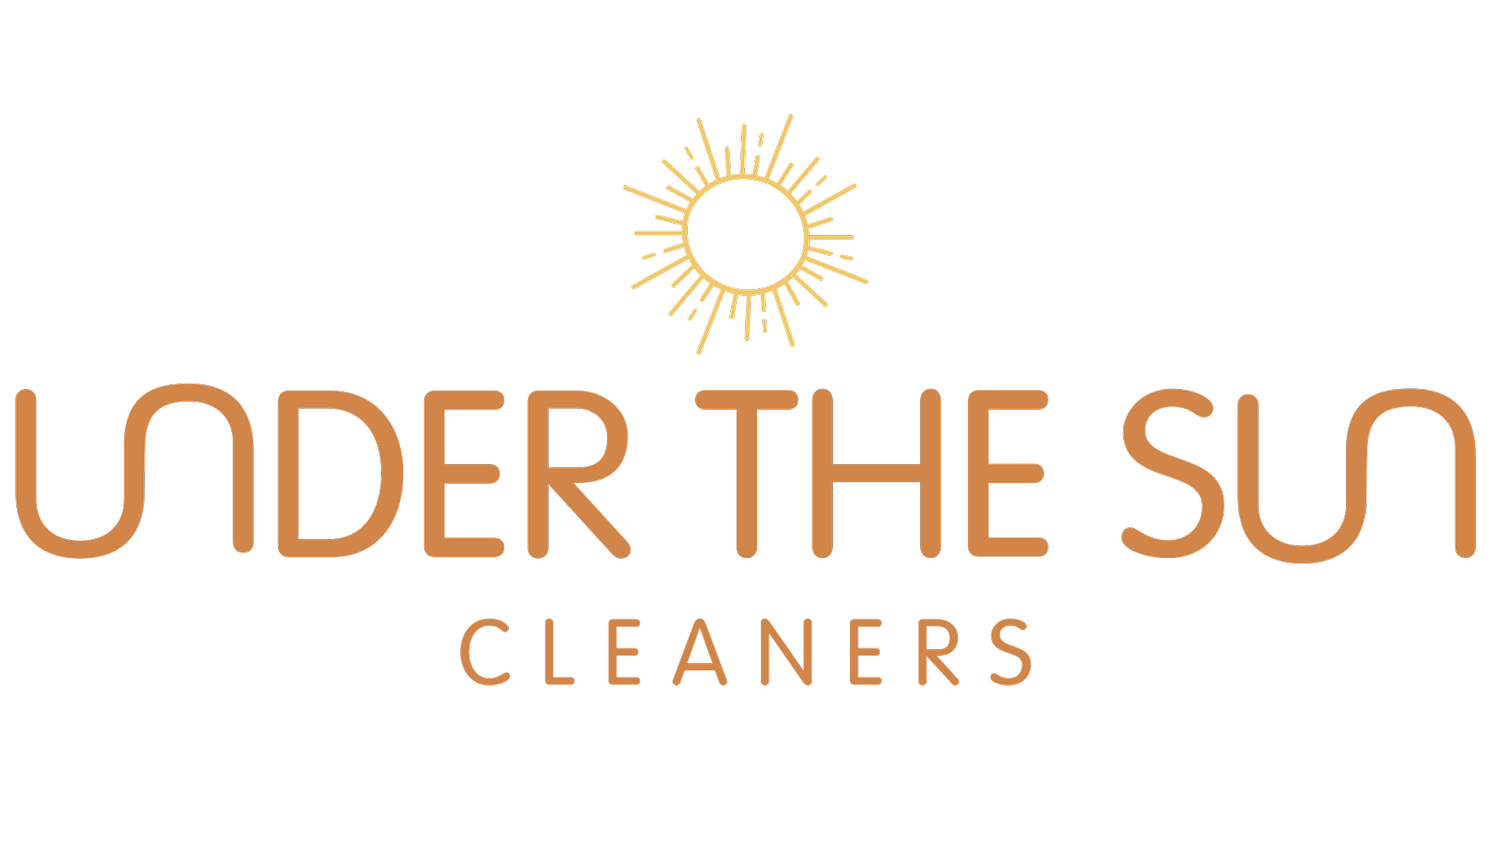 Under the Sun Cleaners